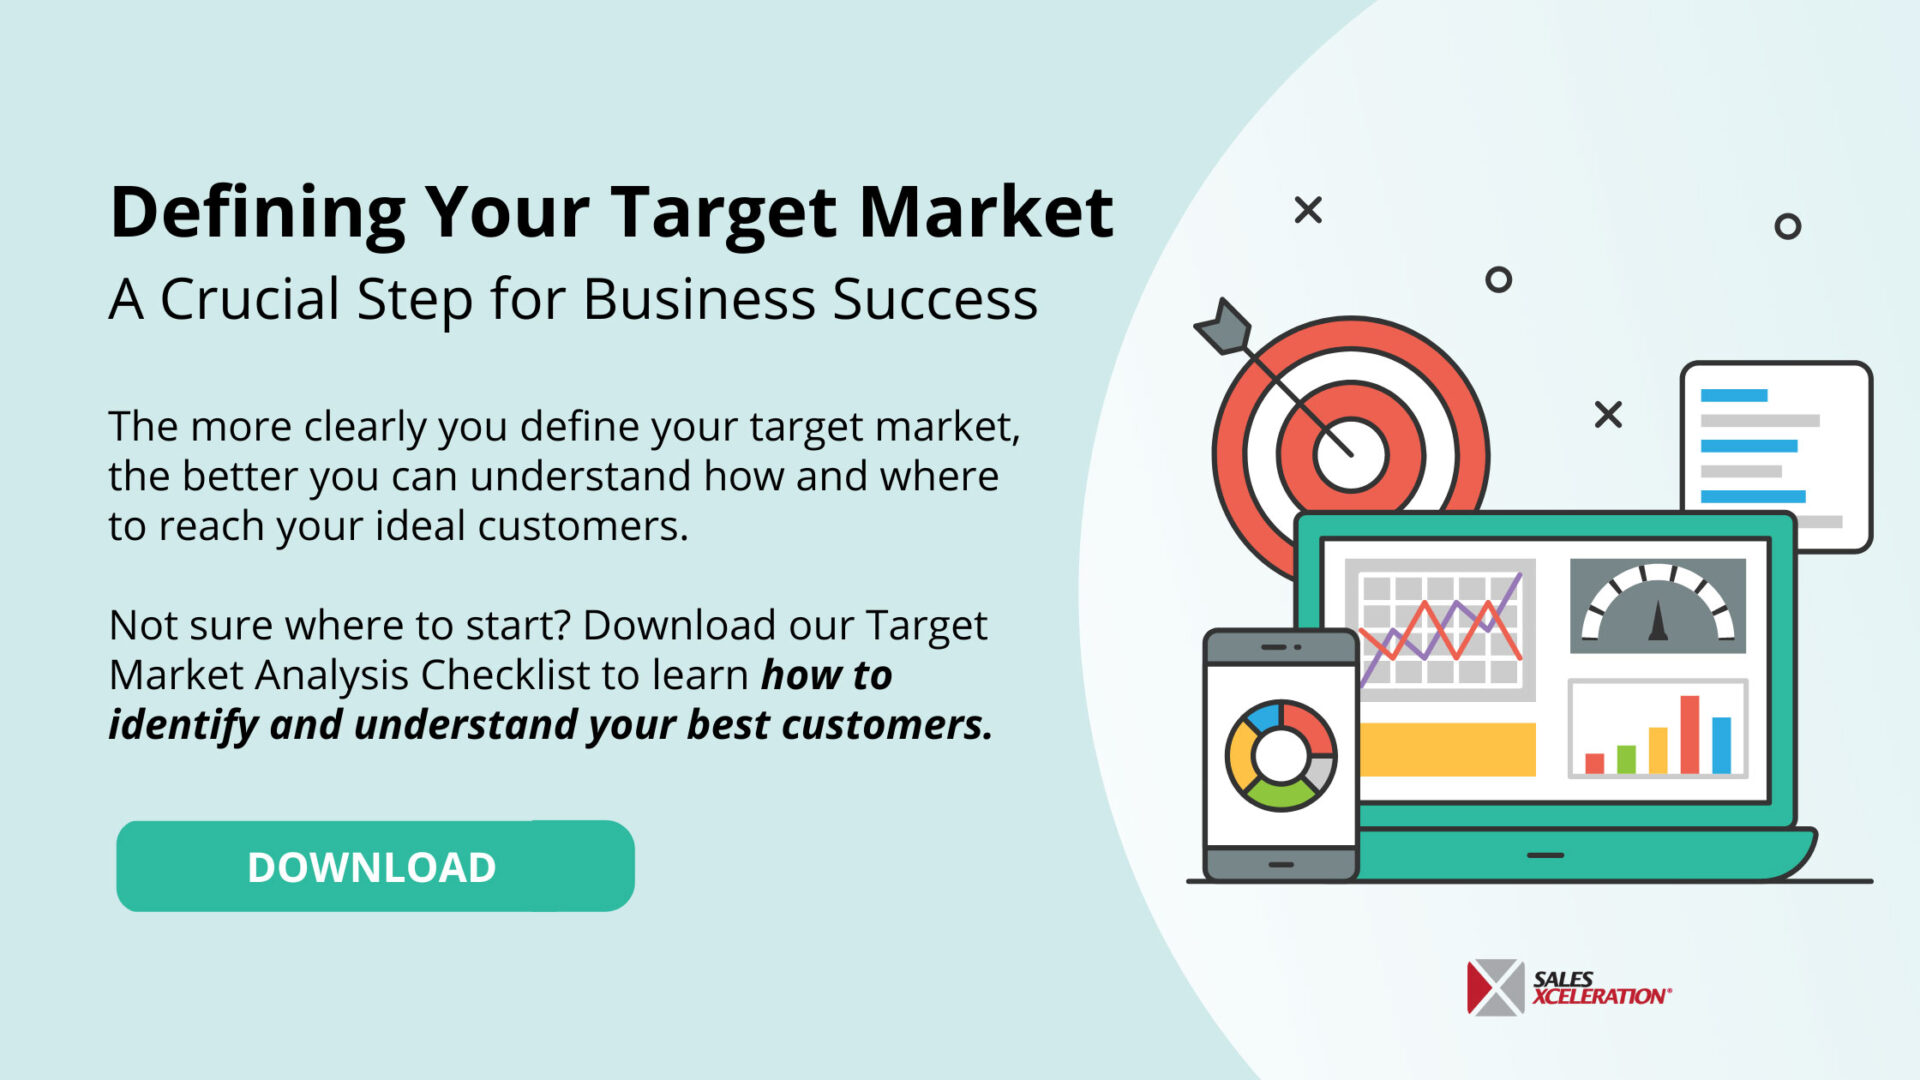 Defining Your Target Market - A Crucial Step for Business Success